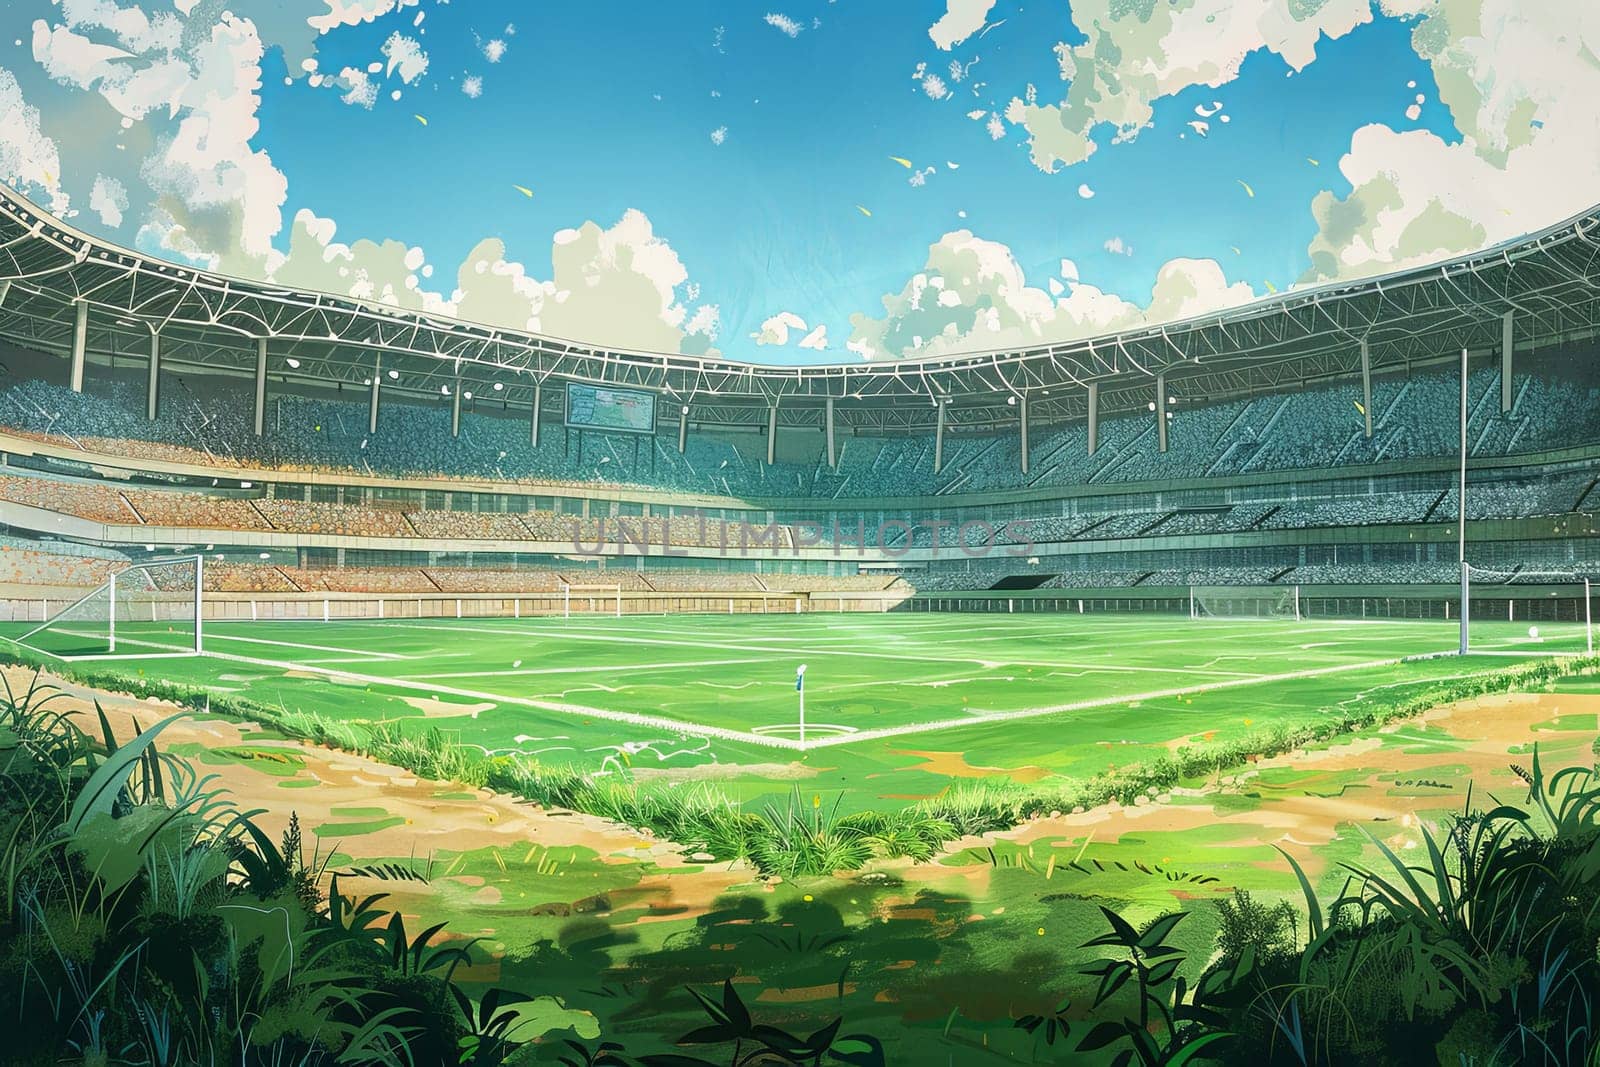 A vibrant painting capturing a soccer field in a bustling stadium with fans cheering in the stands.